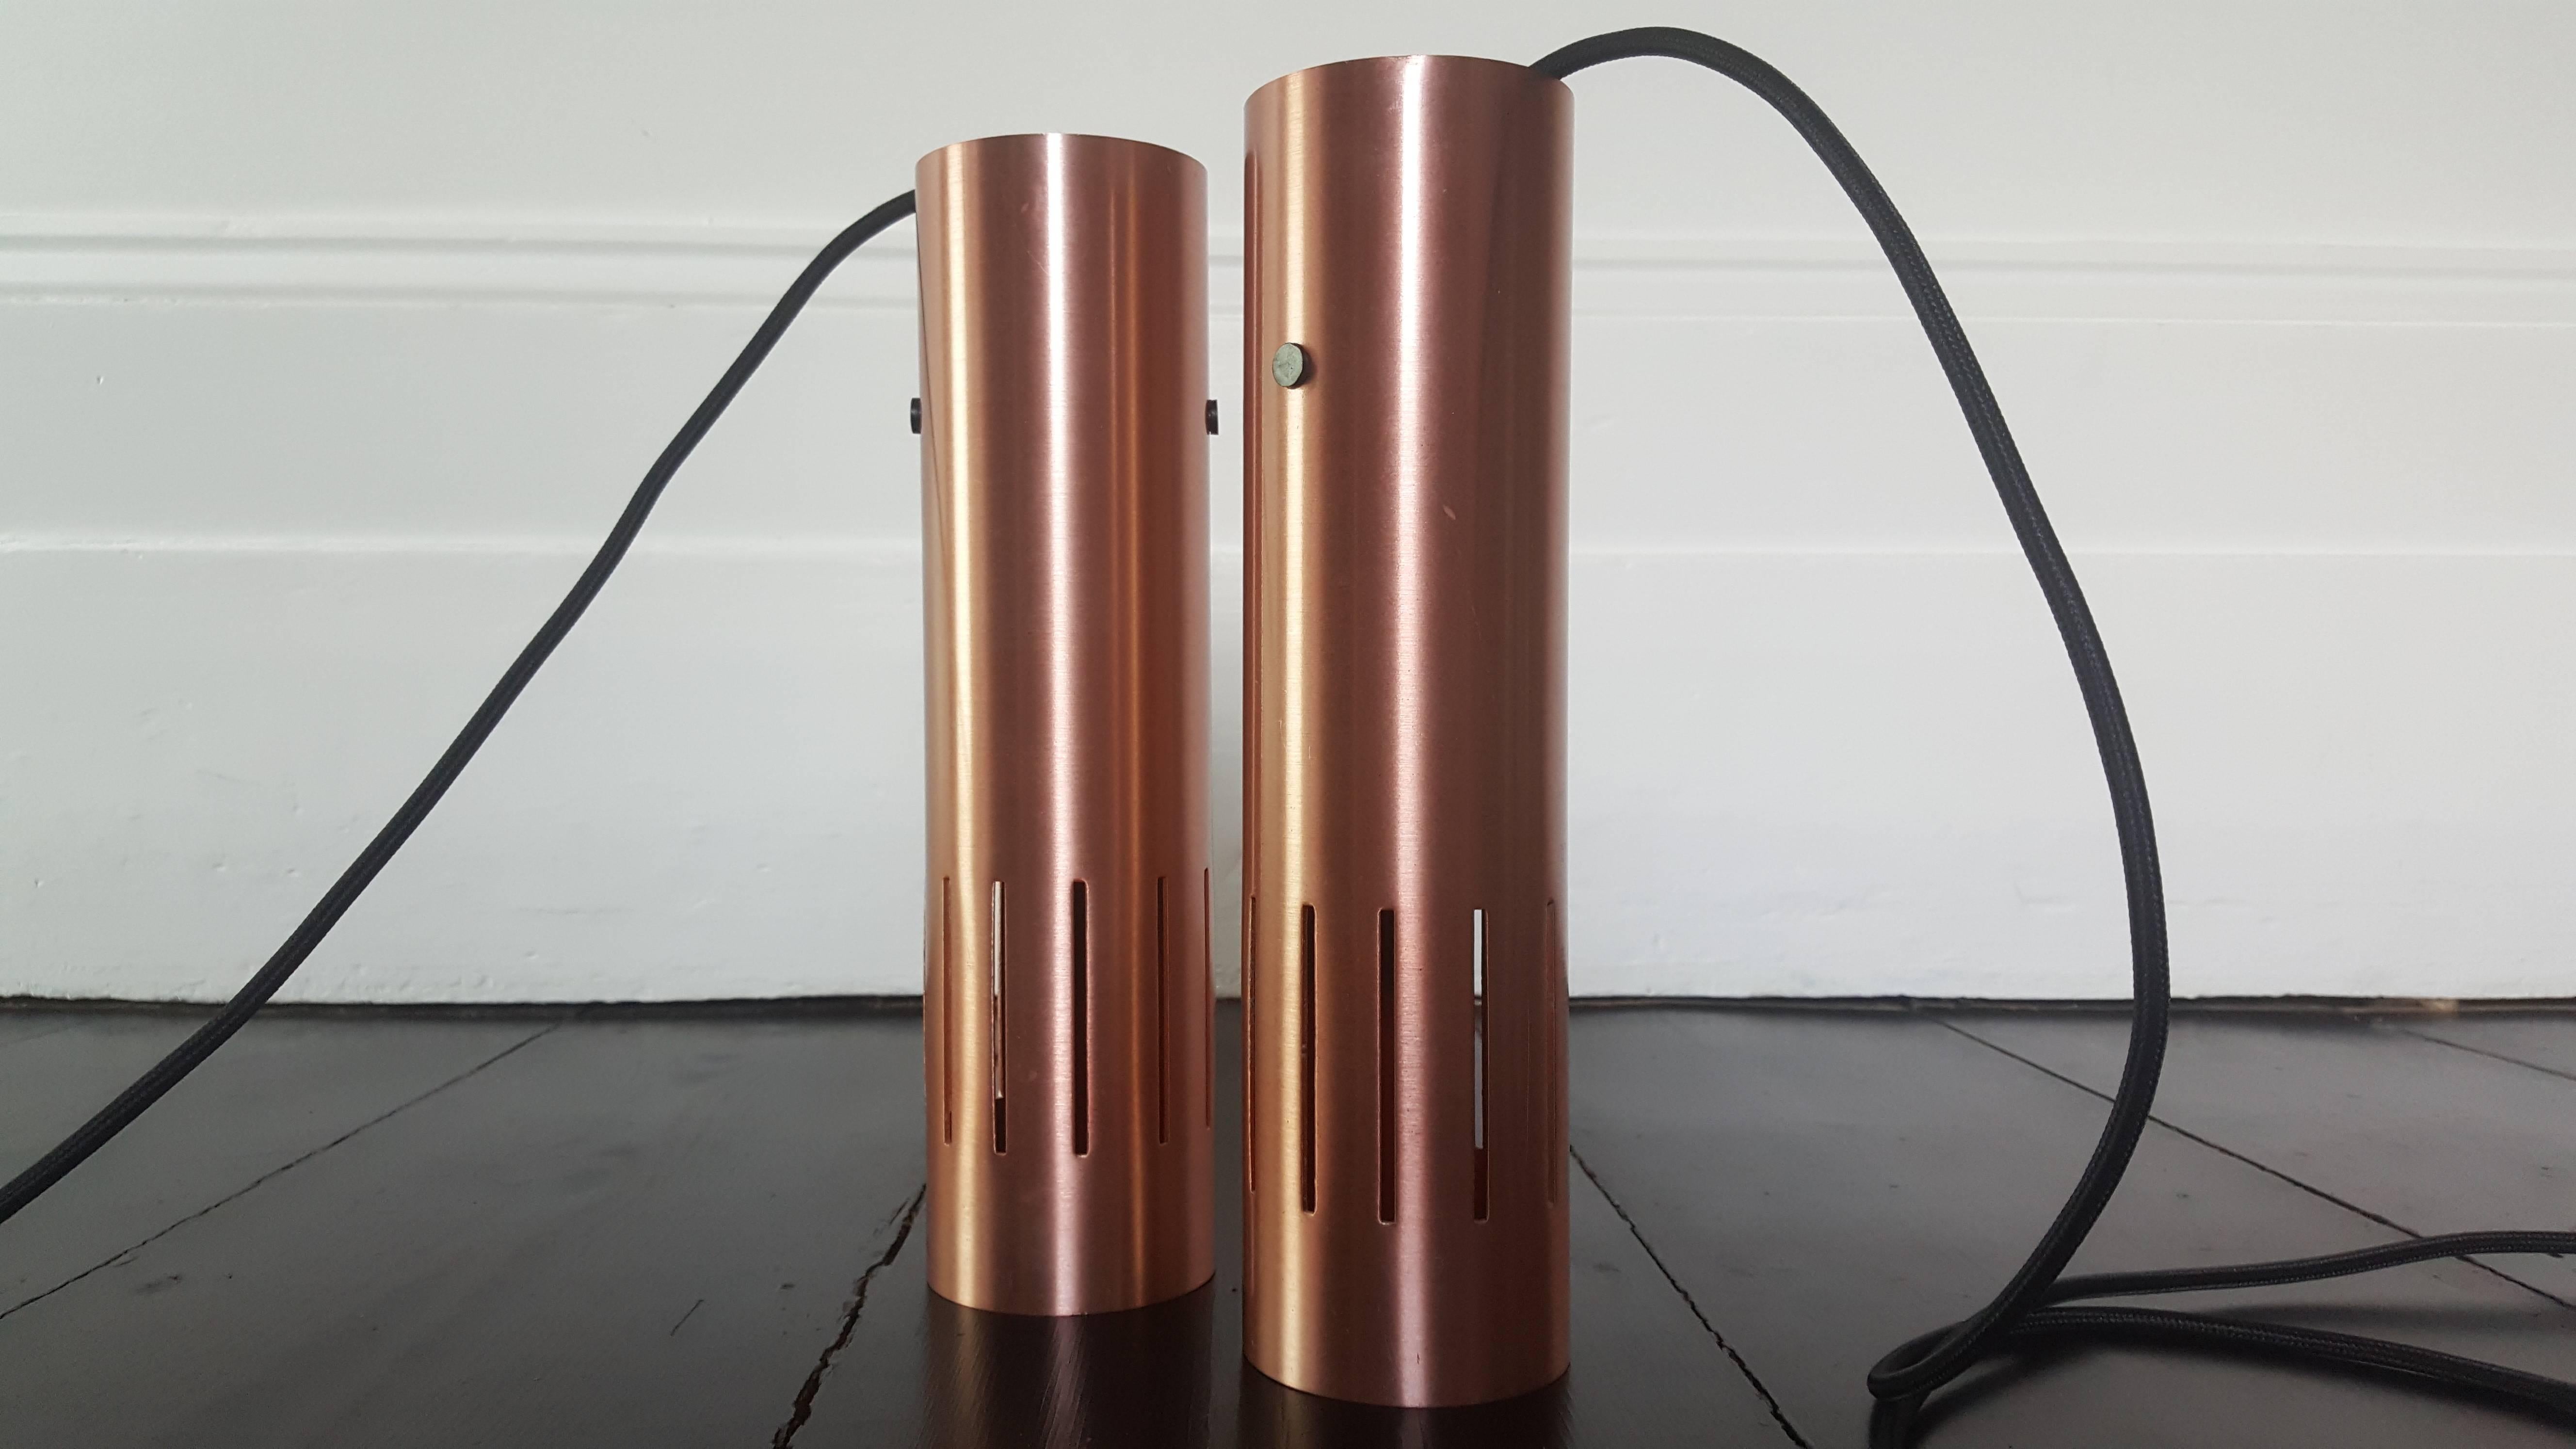 A pair of copper Jo Hammerborg Trombone pendant lights, manufactured by Fog & Mørup in Denmark during the 1960s. Constructed of brass and aluminium.

The pieces have been UK pat safety tested and passed and are provided with minimal black ceiling